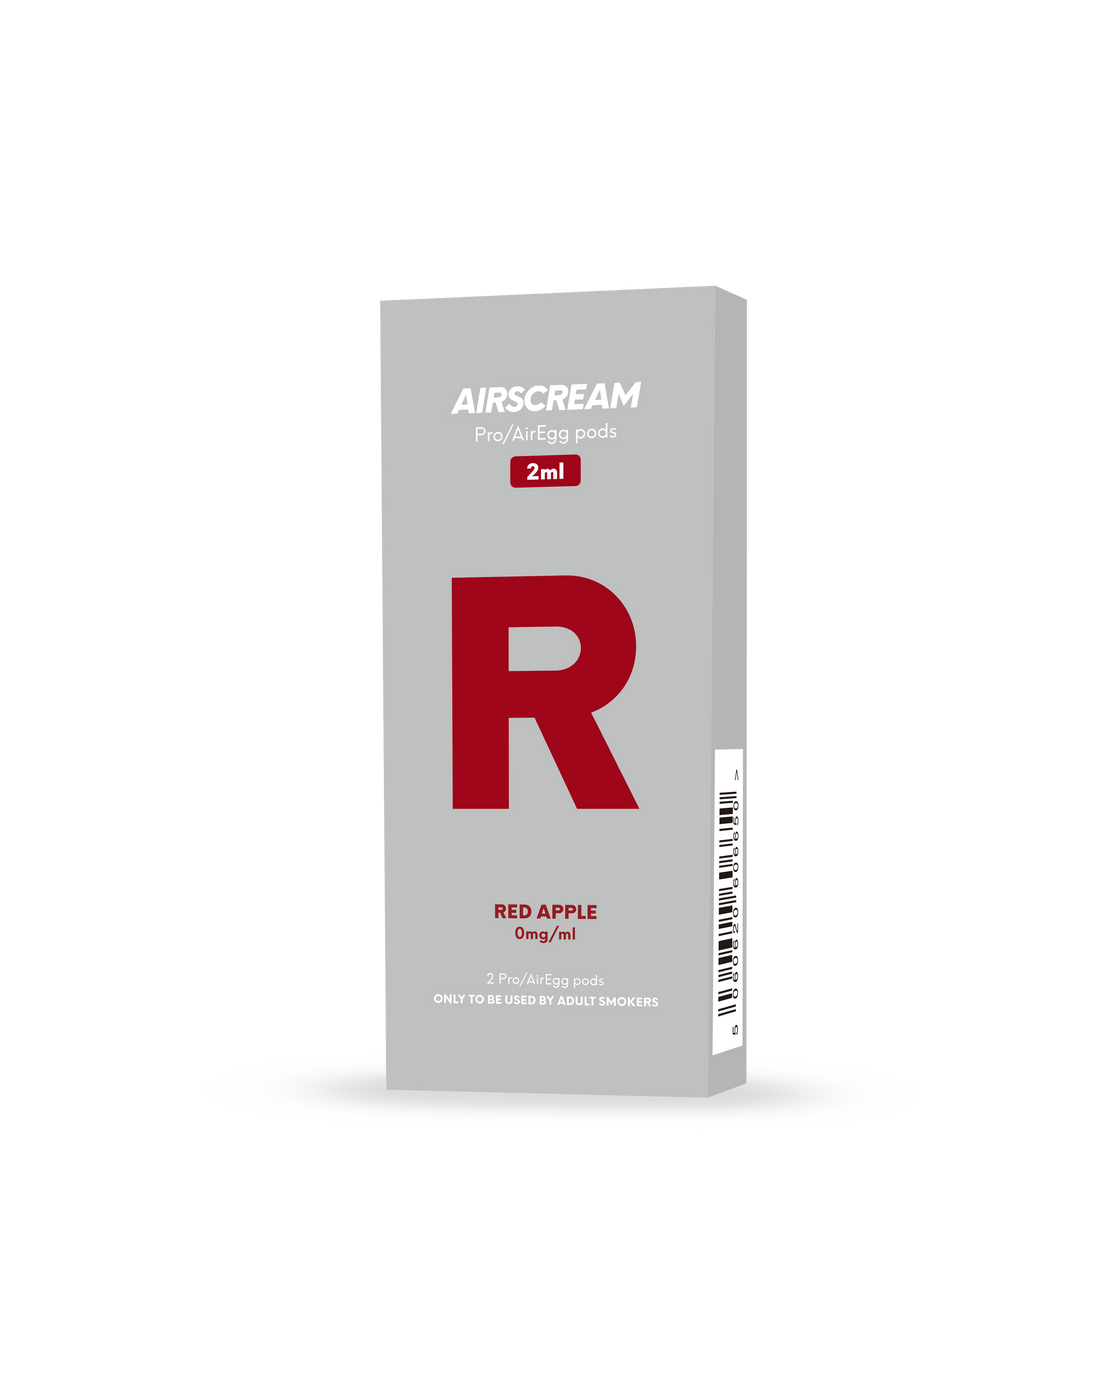 Red Apple - AIRSCREAM AirsPops Pro 2ml Pods by VapeTrend NZ